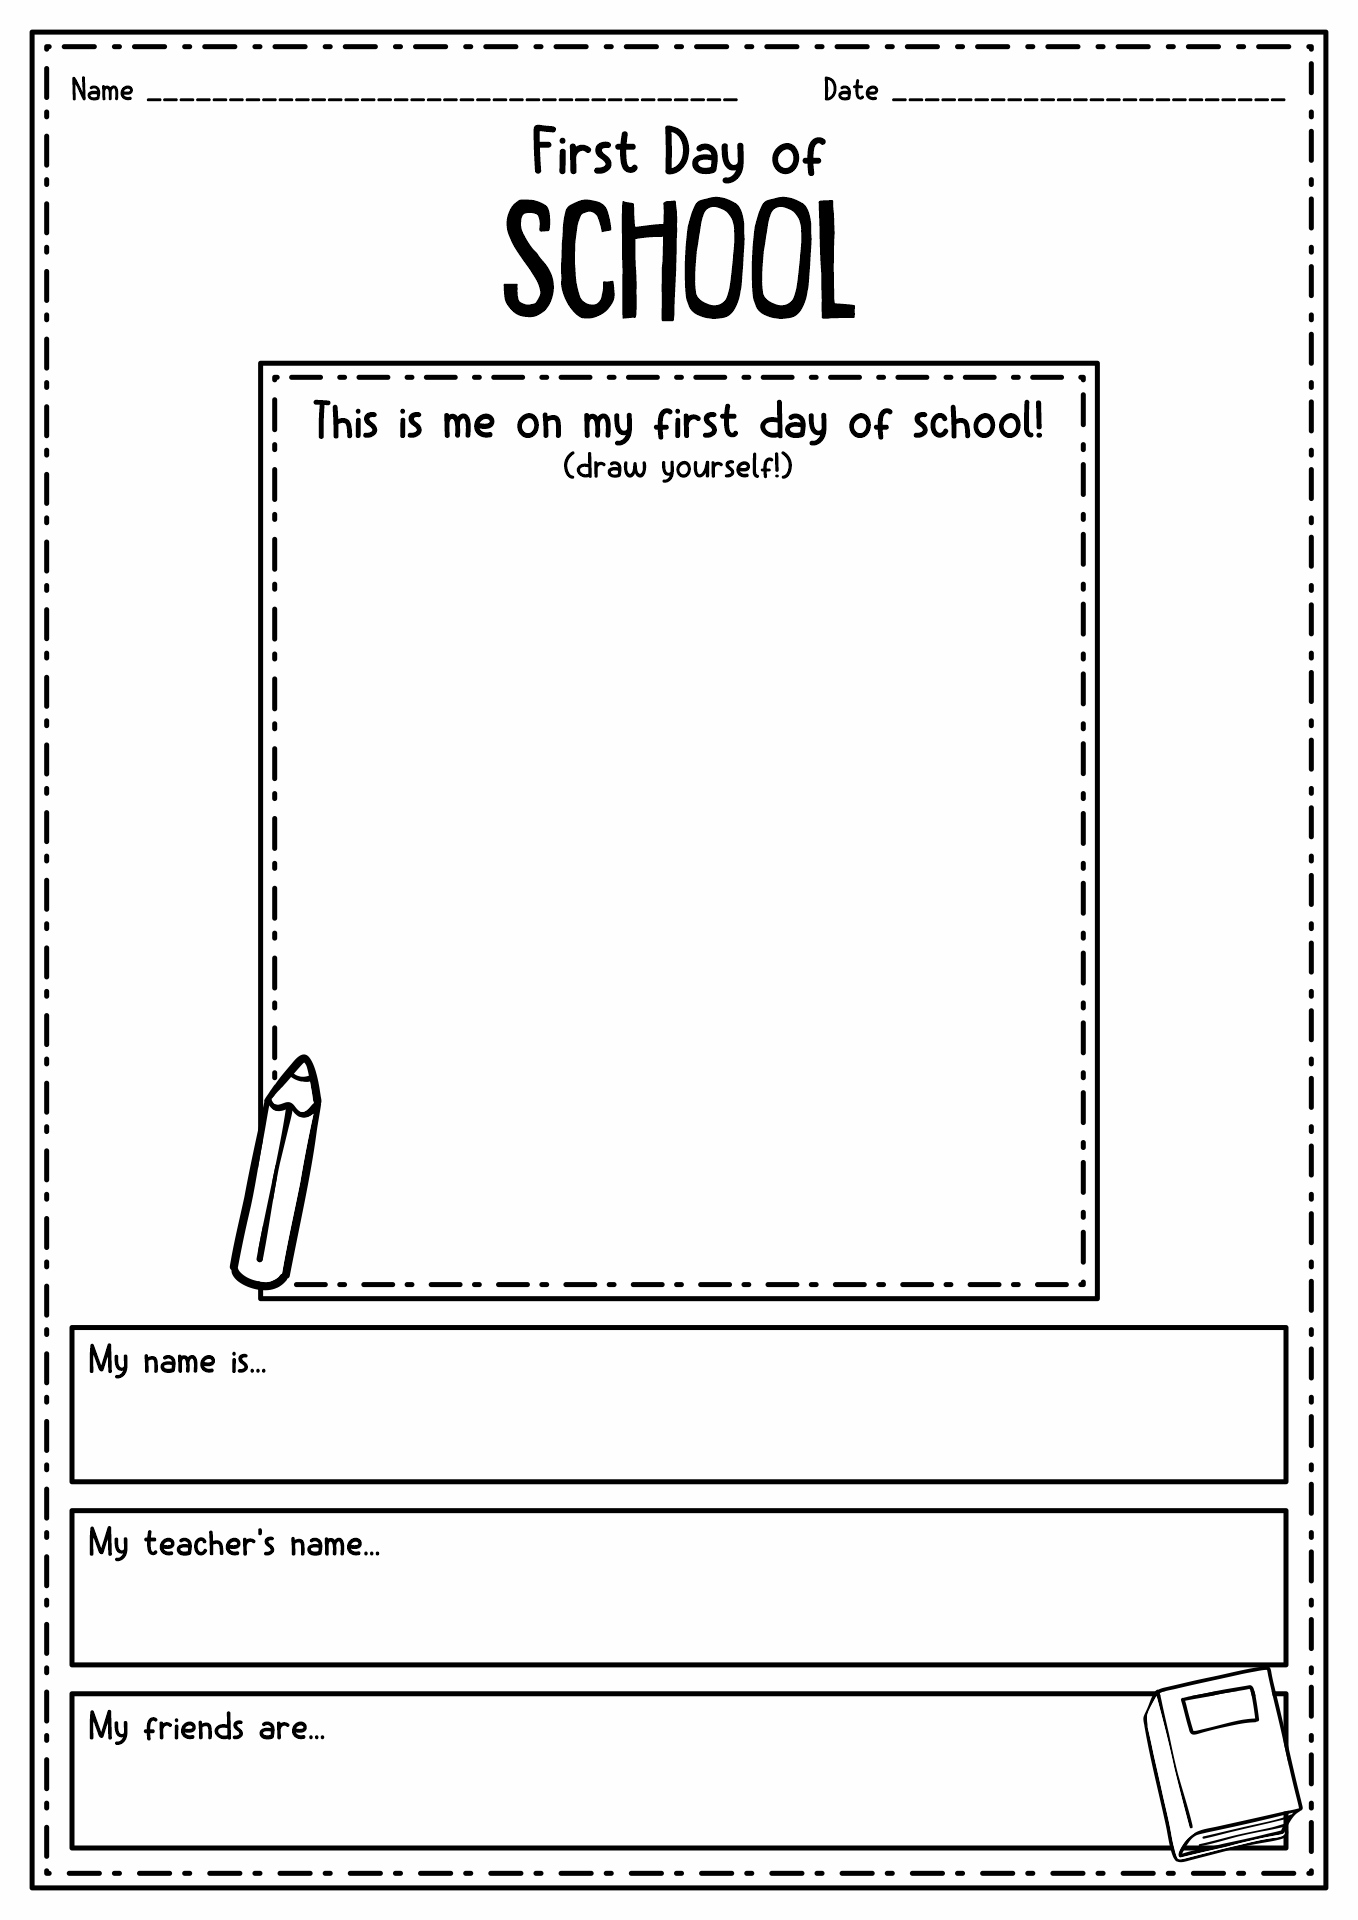 First Day of School Worksheets 1st Grade